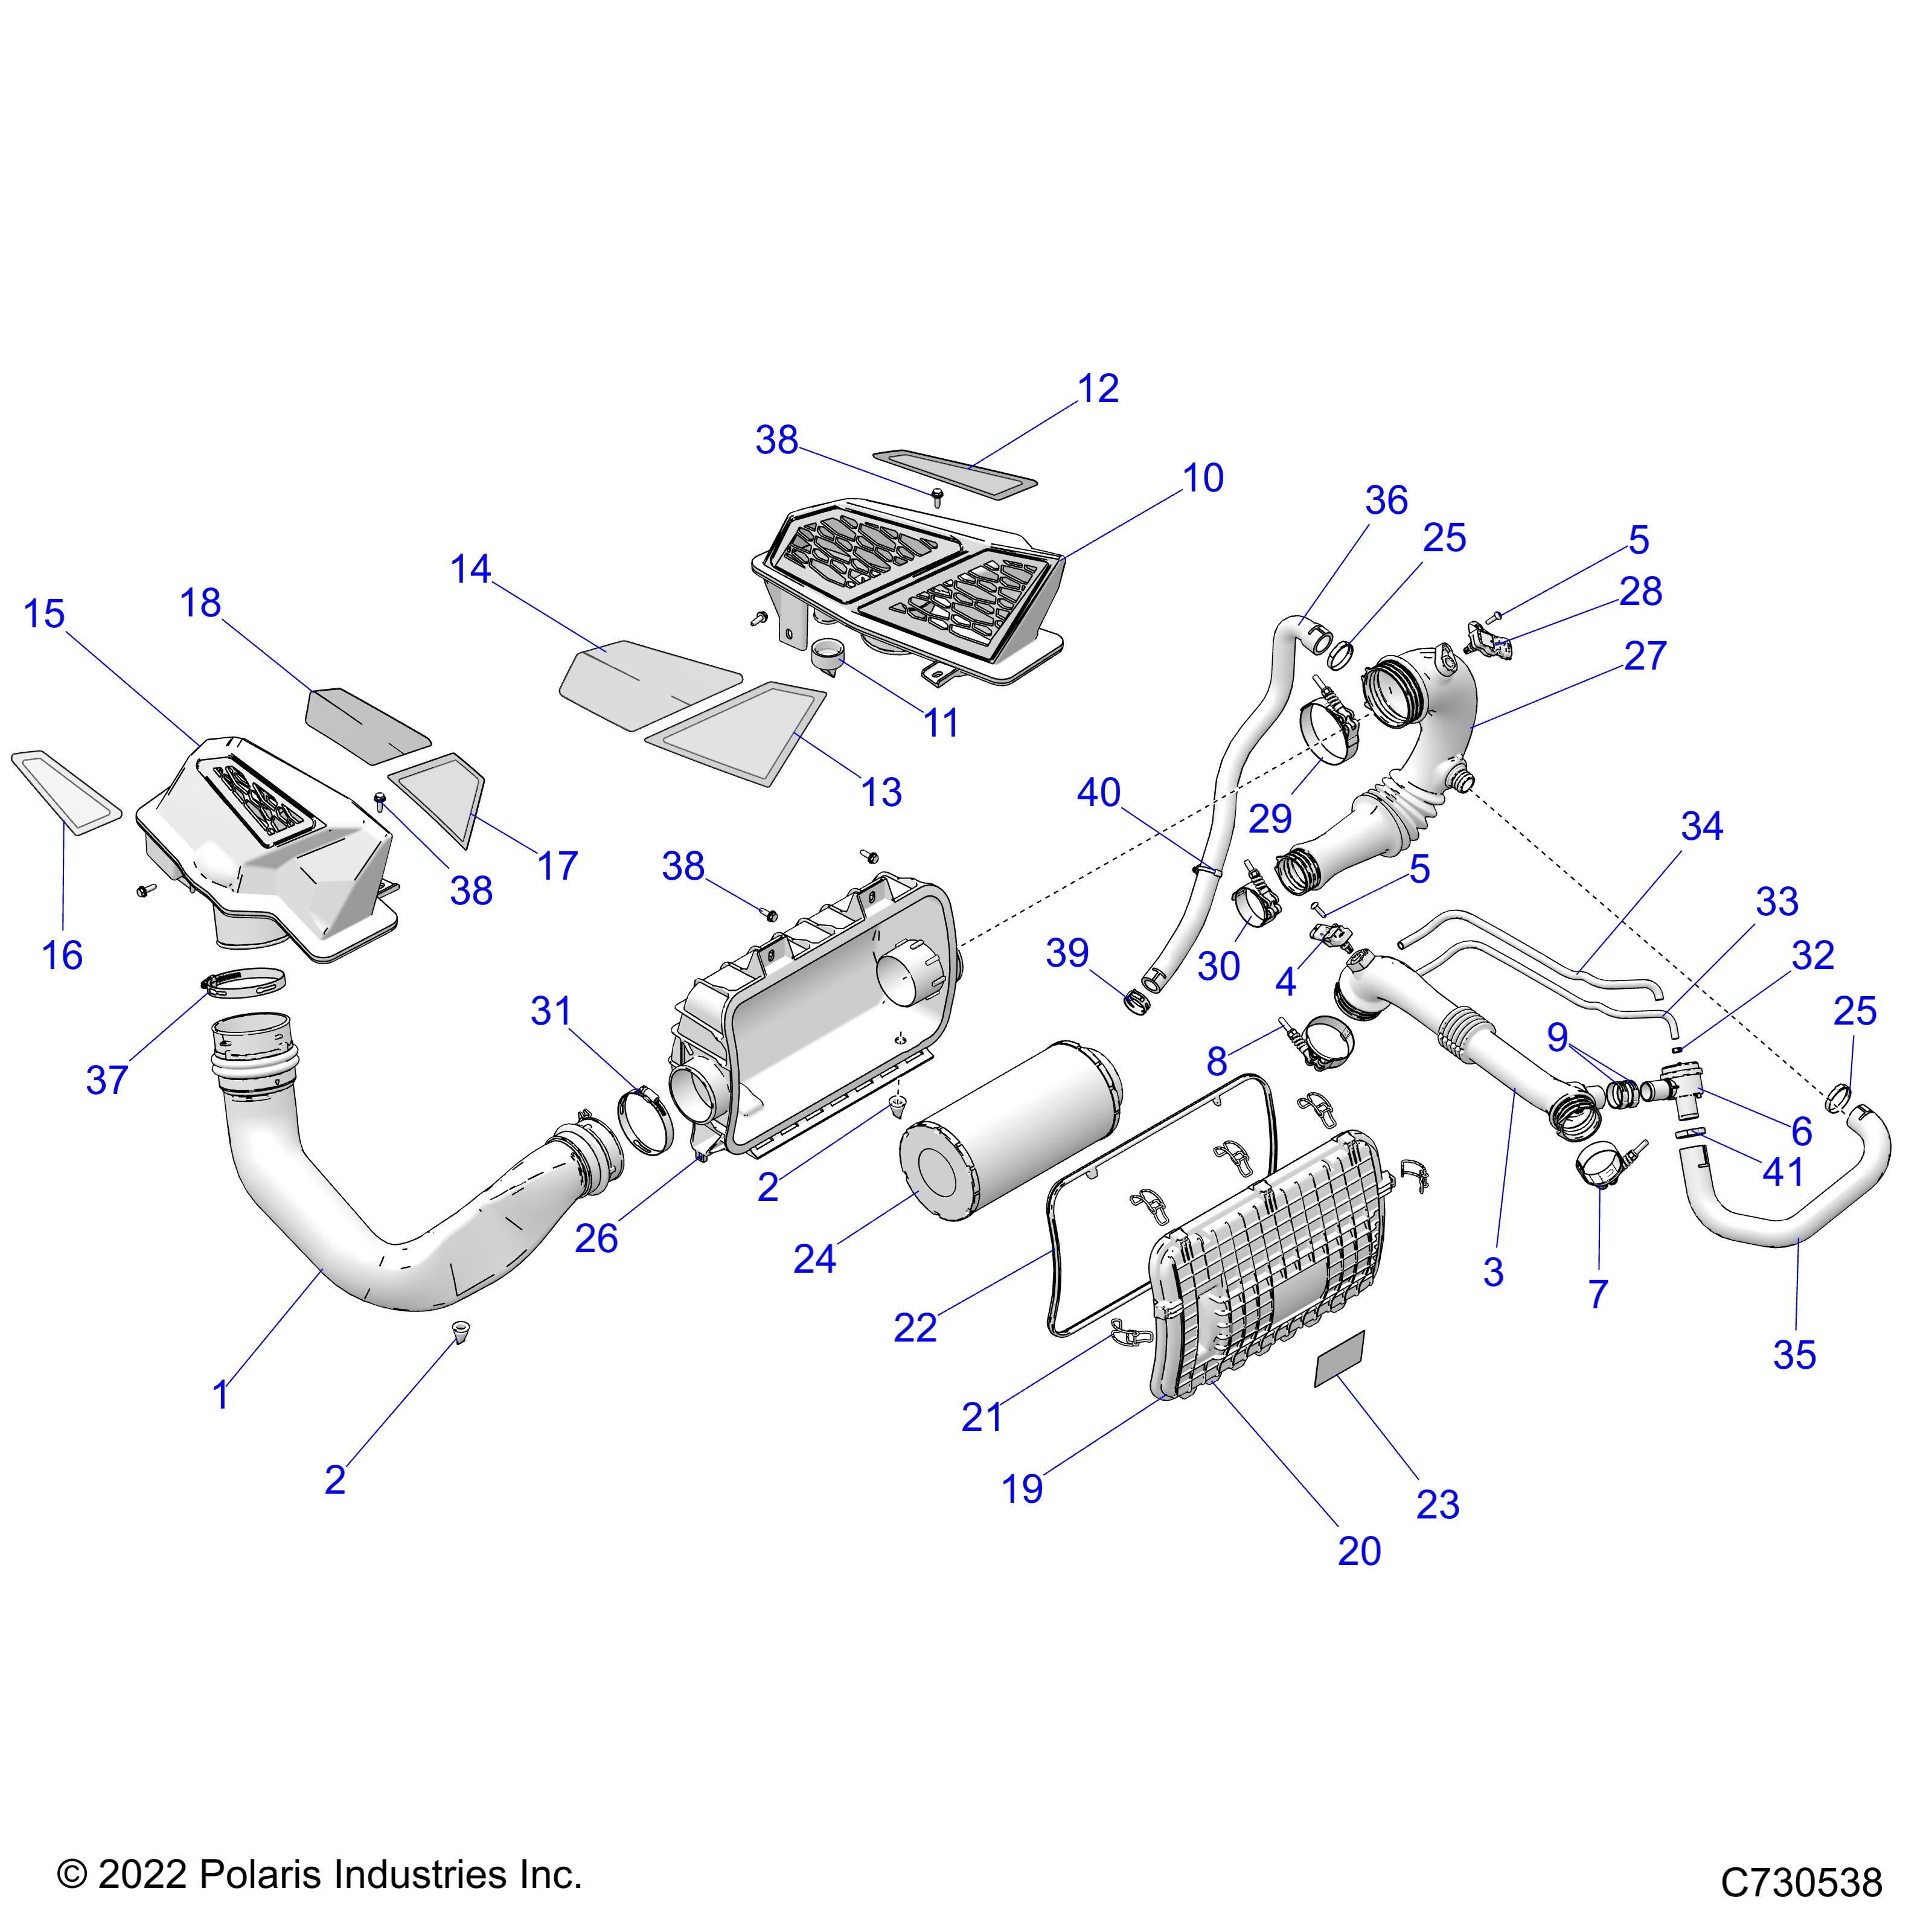 Part Number : 5814549 AIRBOX SEAL